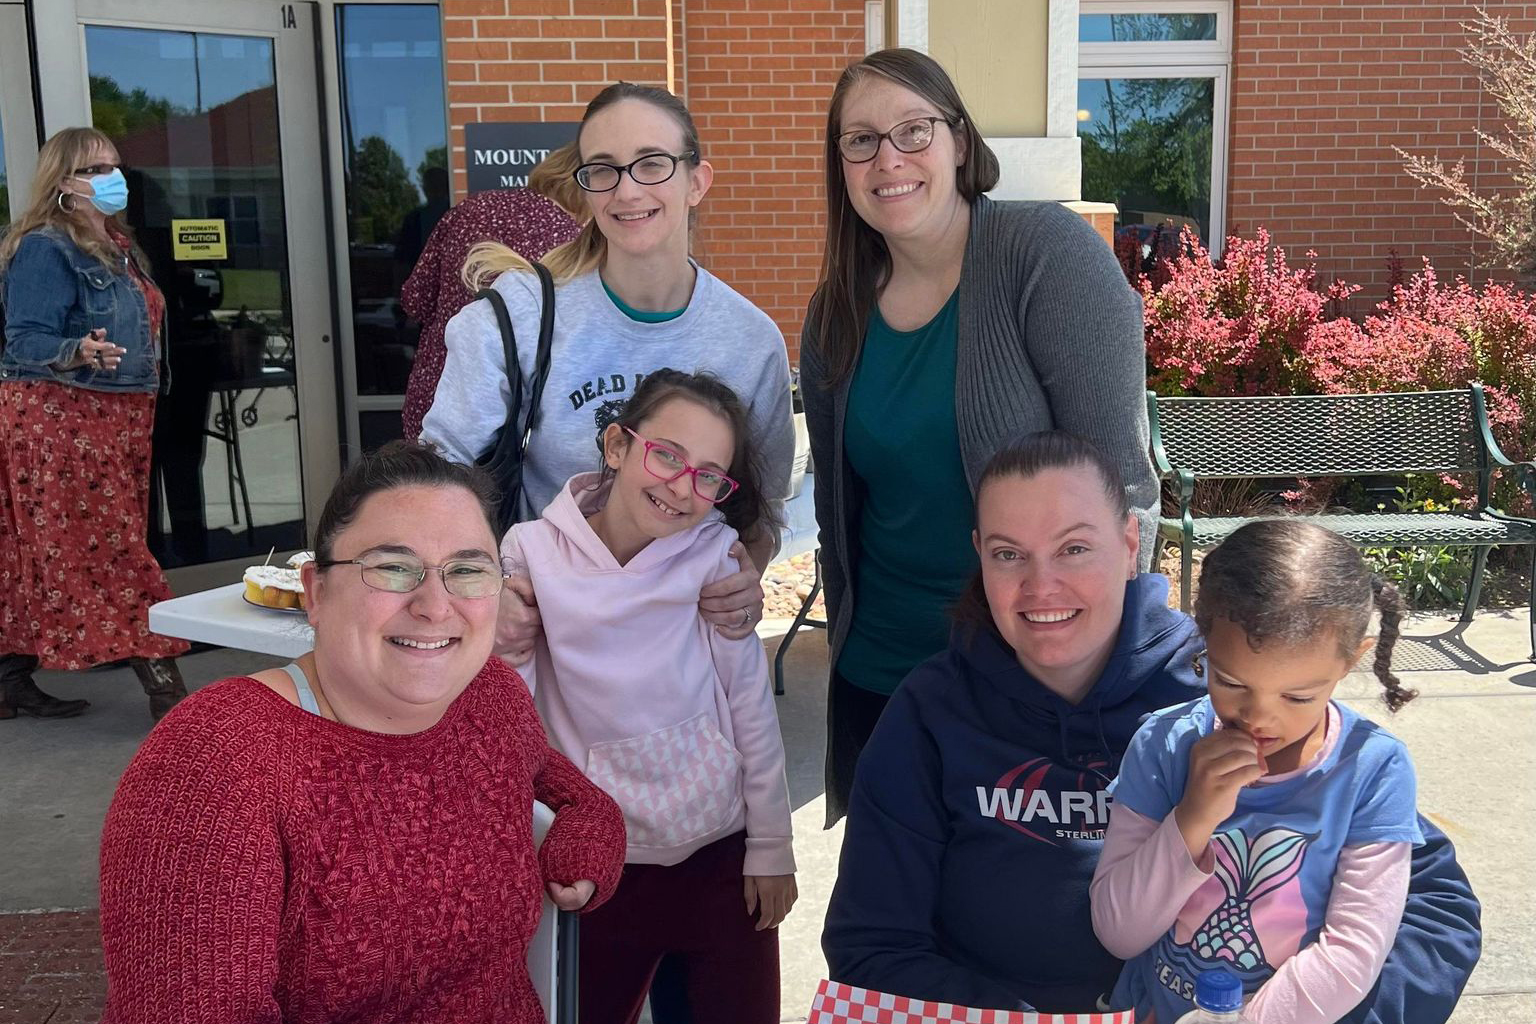 We celebrated 'St. Joseph the Worker Day' with the Sisters of Saint Joseph, enjoying food trucks and fellowship. The event's proceeds supported Dear Neighbor Ministries, aiding the Wichita Hilltop neighborhood. Such gatherings strengthen community bonds and support vital social services.